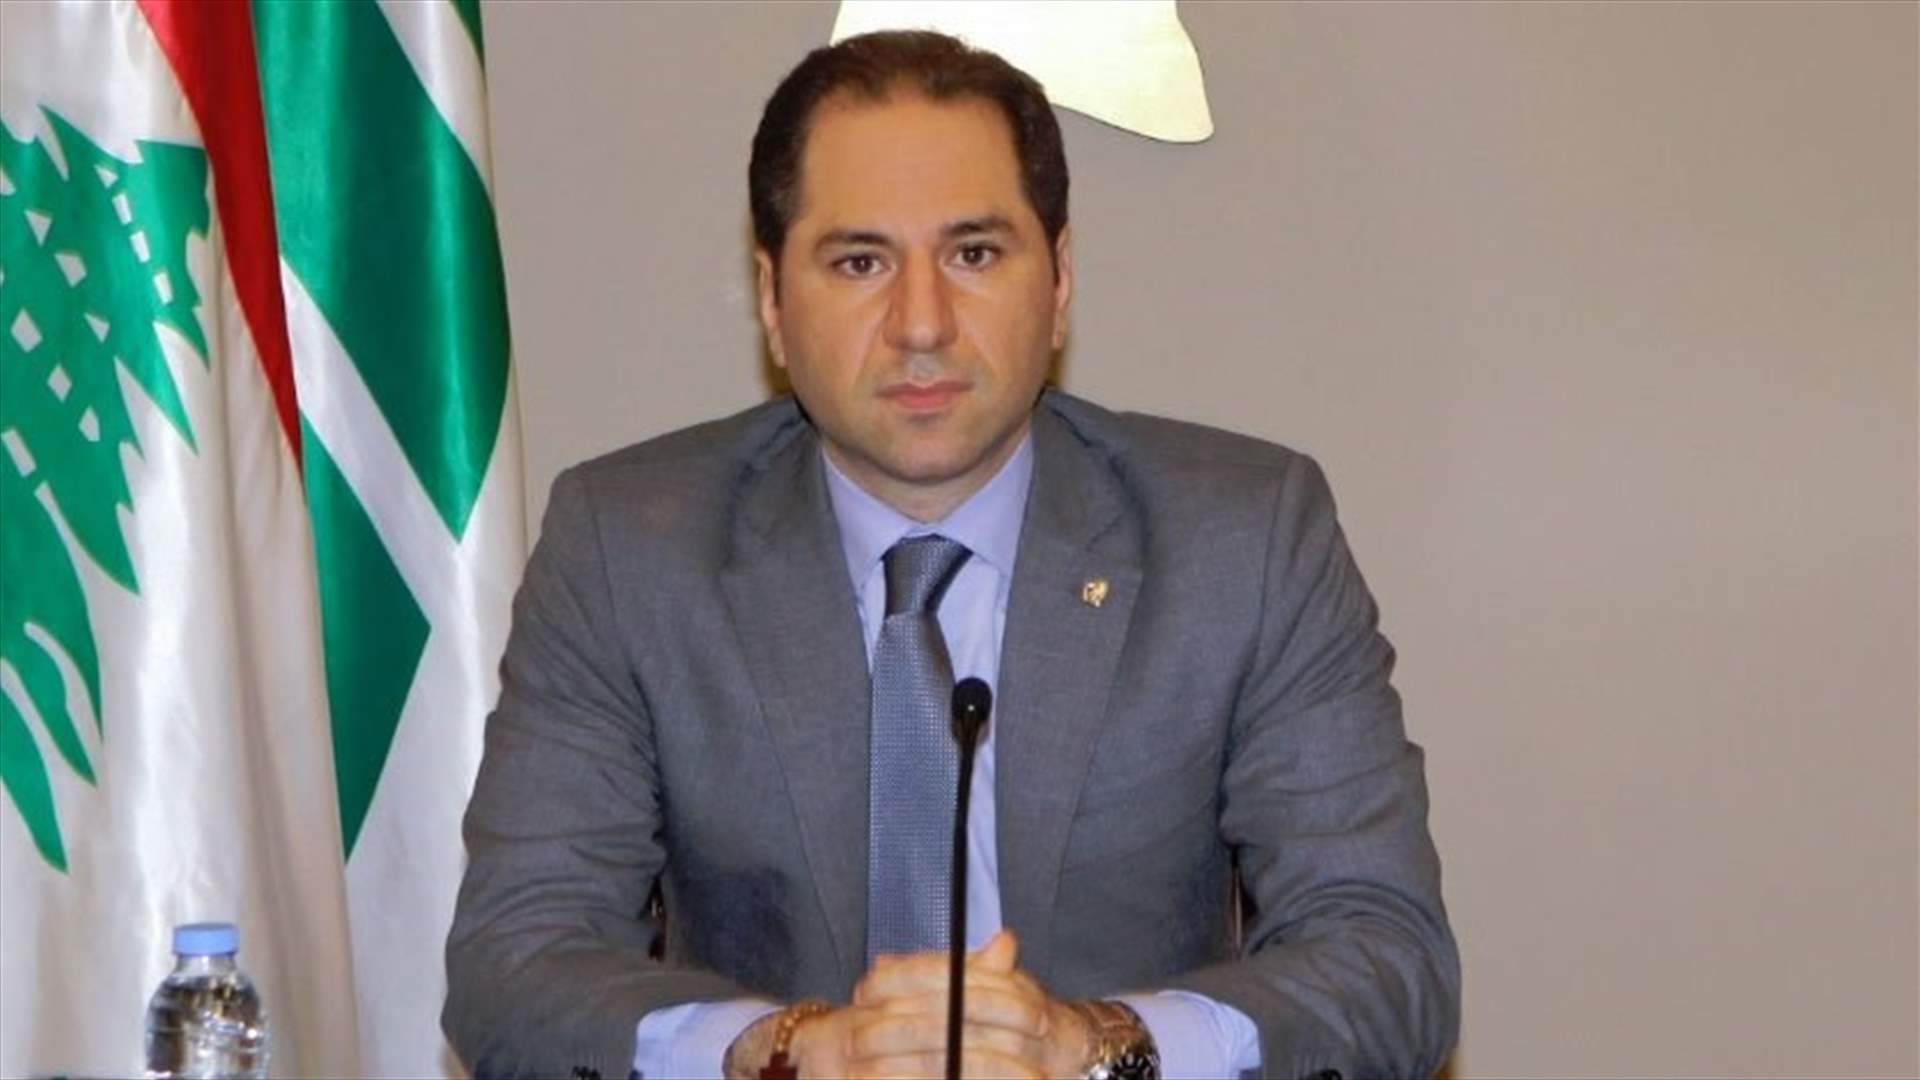 Gemayel says Lebanon lacks agreement over clear vision on the country’s future